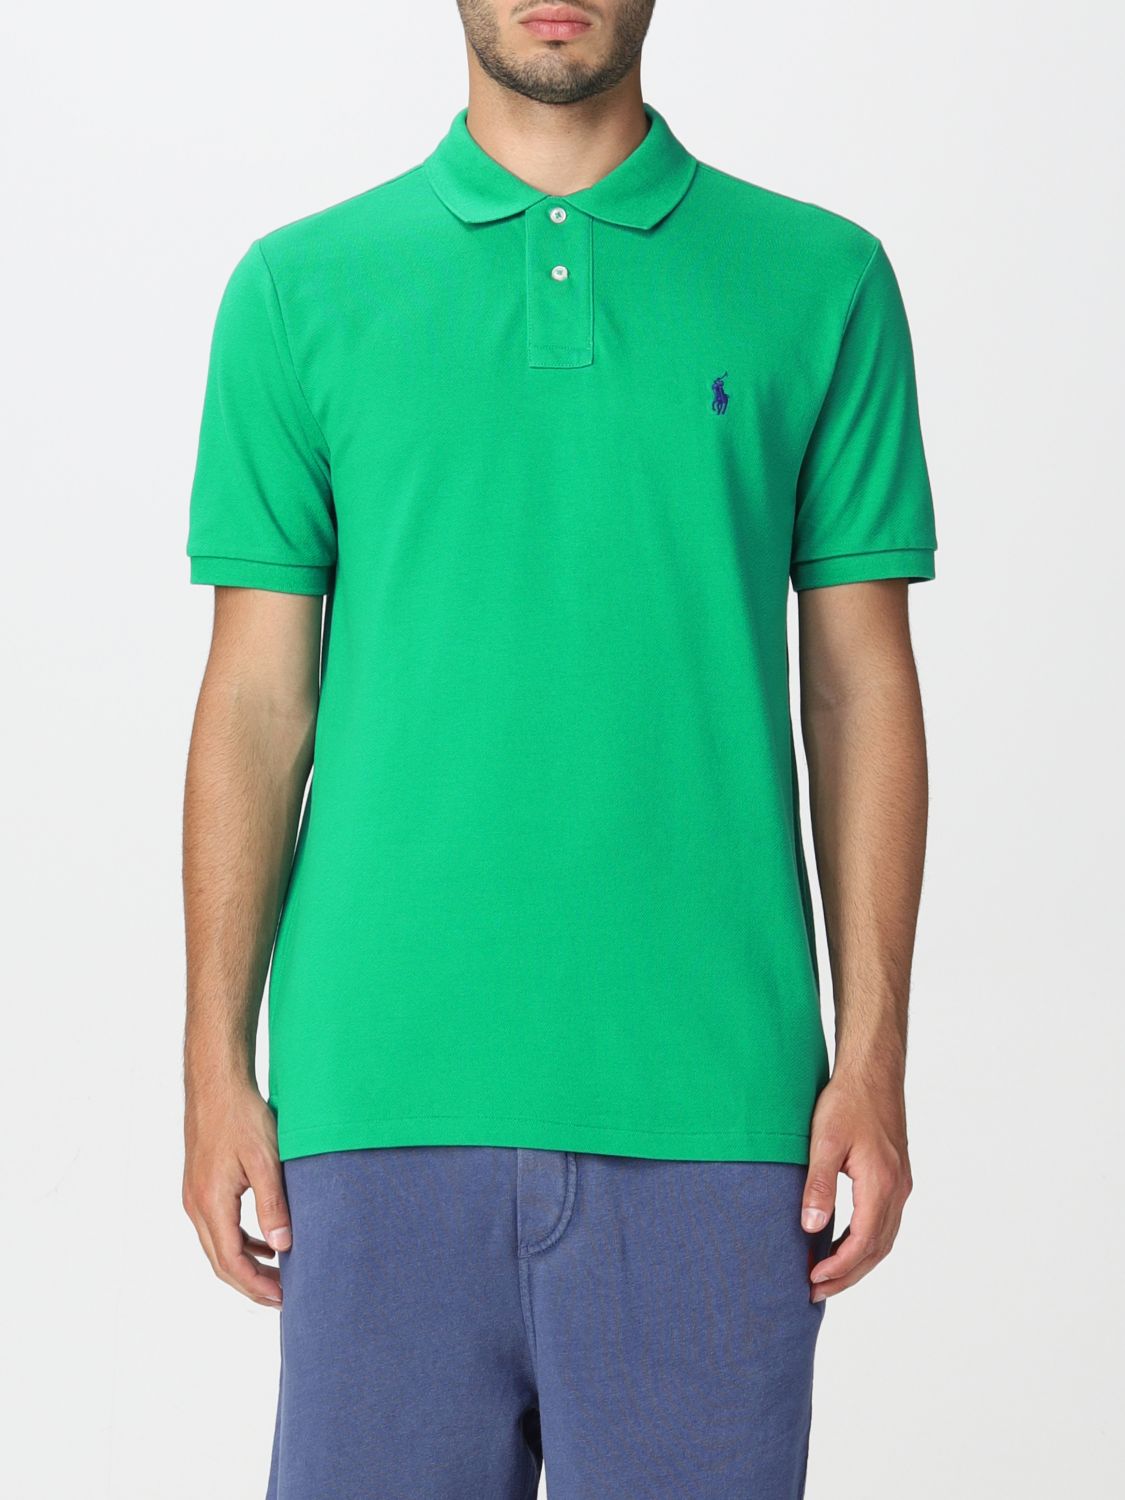 Bewolkt Feat hypotheek Polo Ralph Lauren Outlet: cotton polo shirt with logo - Sage | Polo Ralph  Lauren polo shirt 710795080 online on GIGLIO.COM